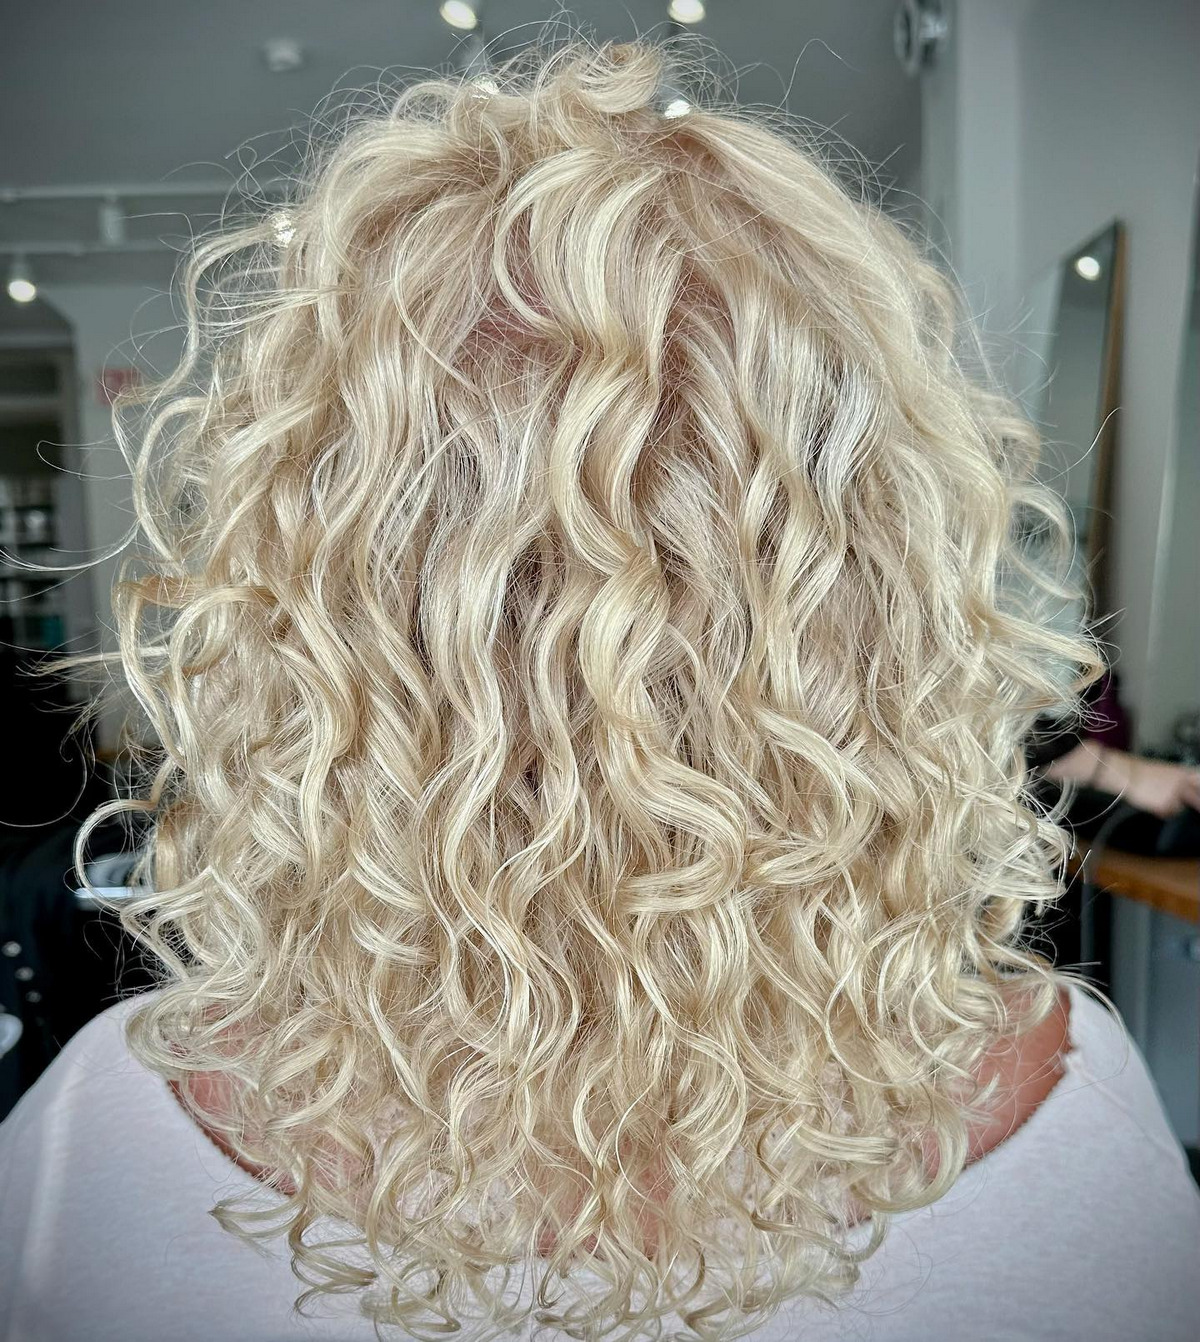 Platinum Blonde Curly Hair With Bright Honey Highlights